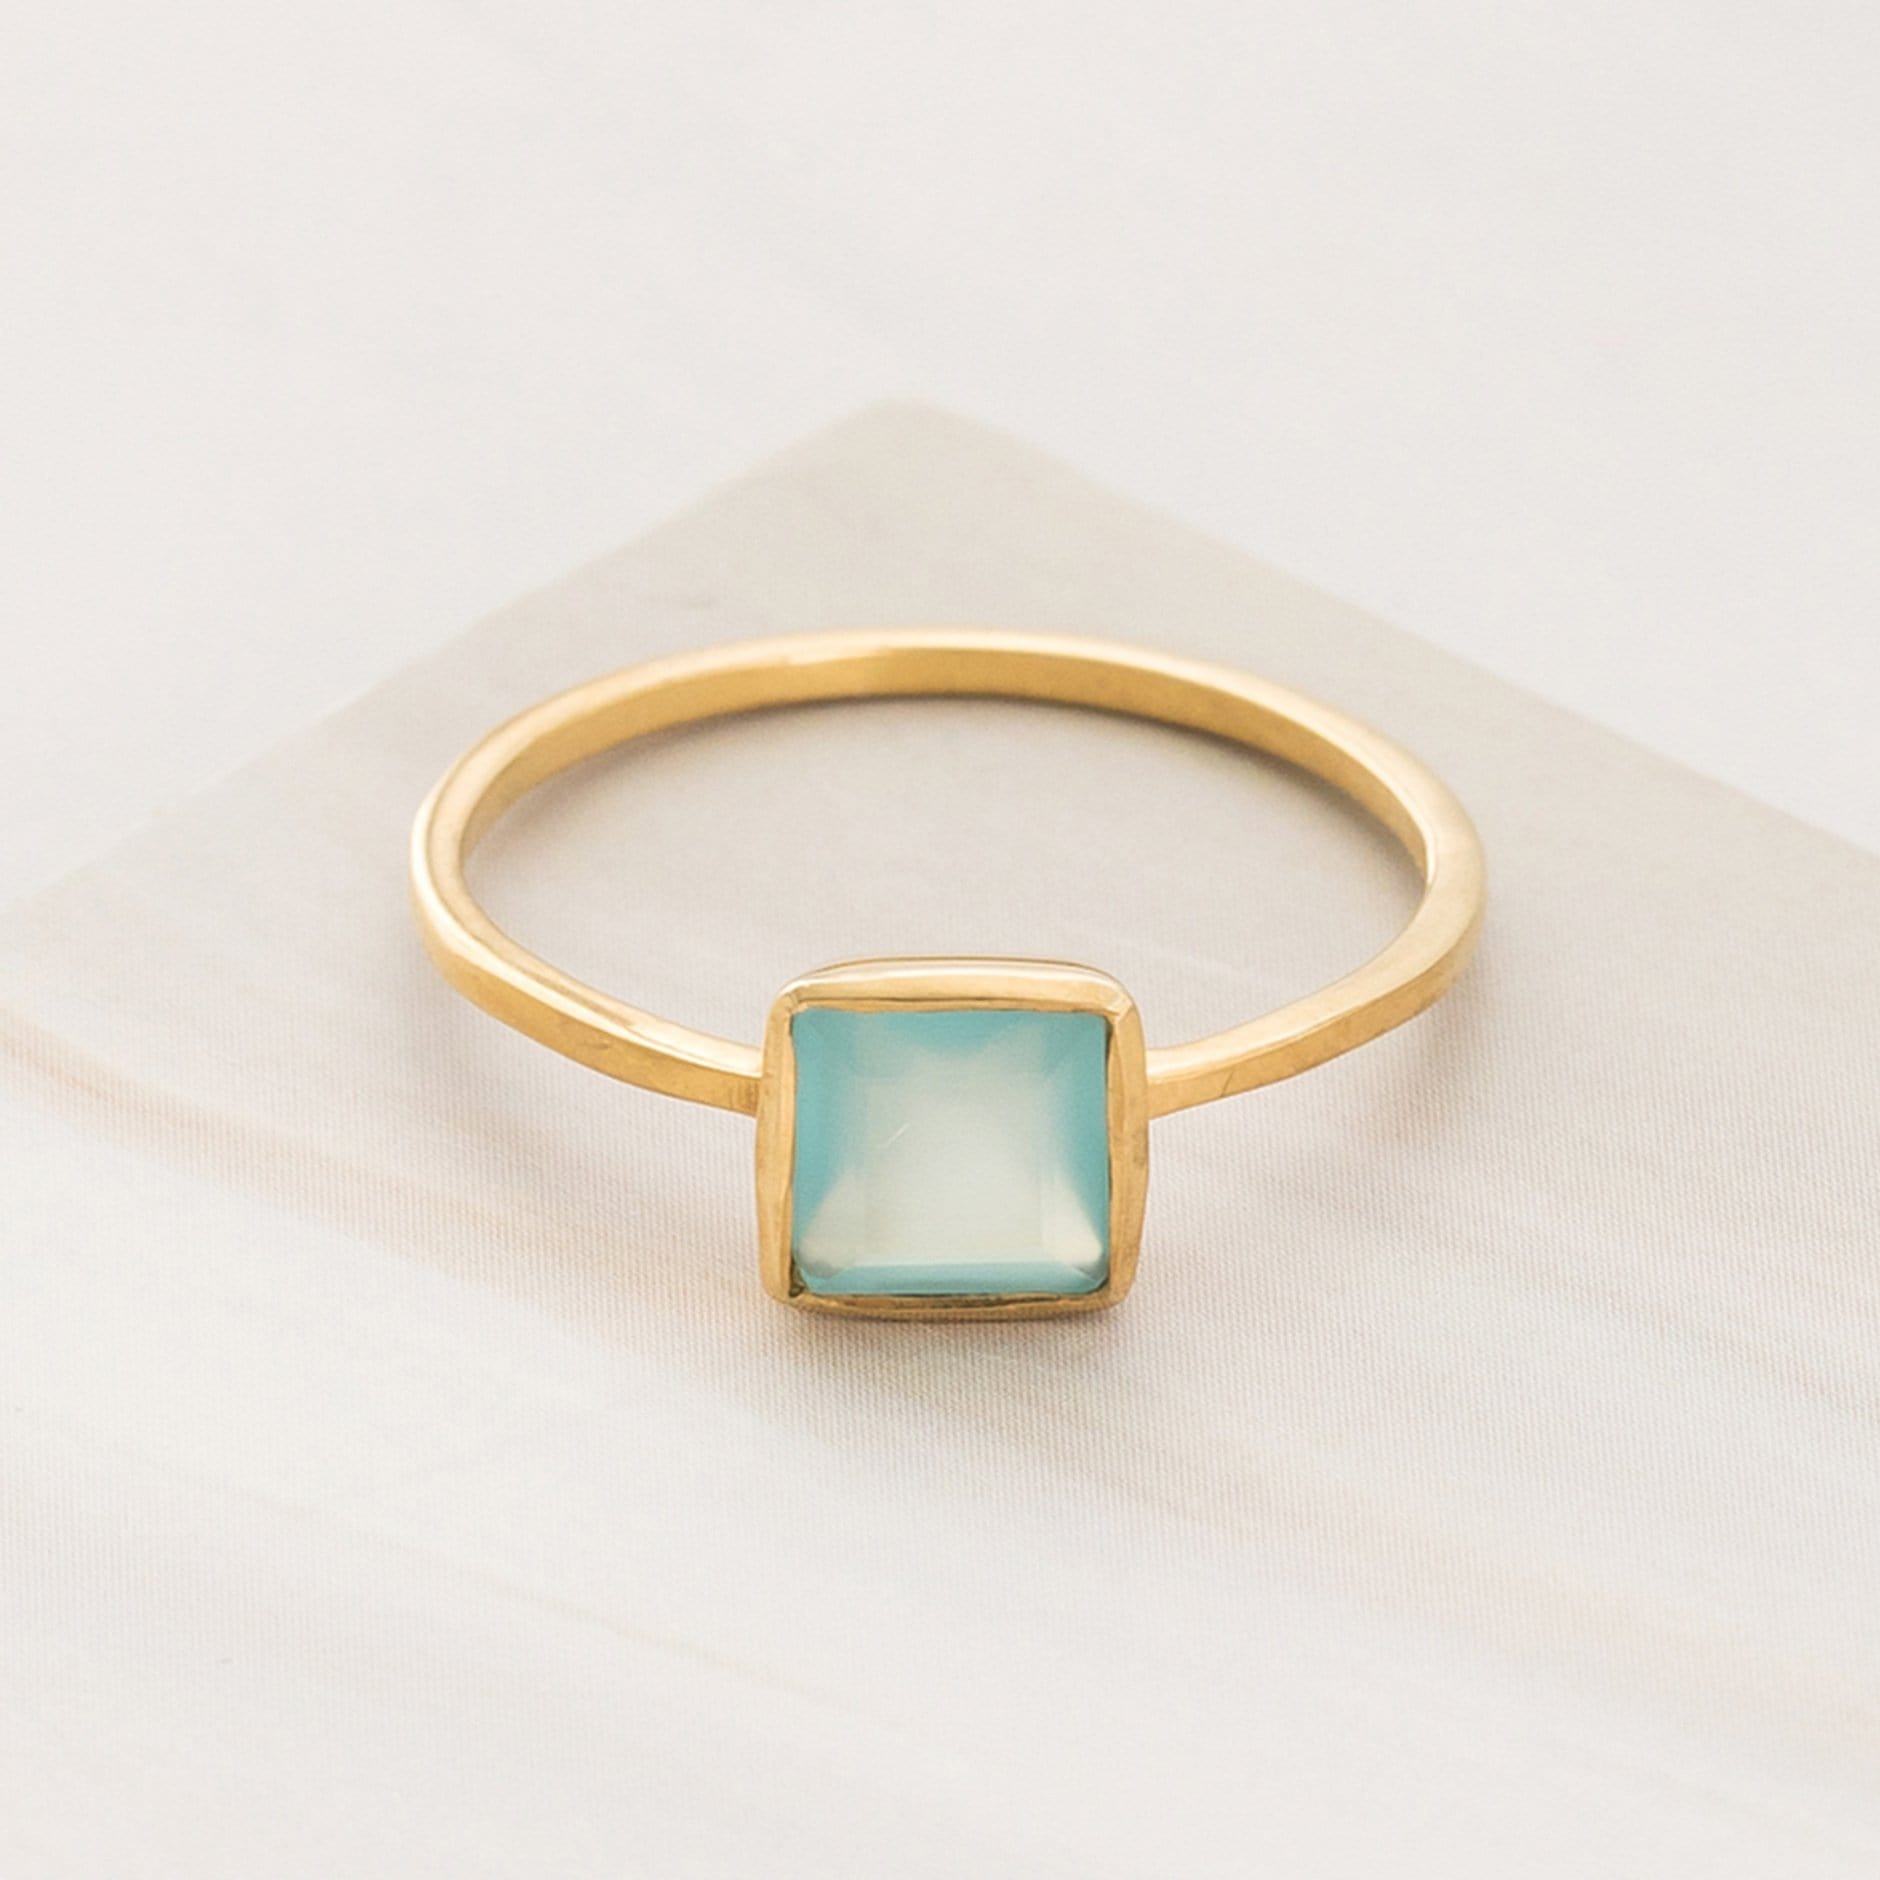 Emblem Jewelry Rings Chalcedony / Square Signature Candy Gemstone Stack Rings (Ring Size 6)